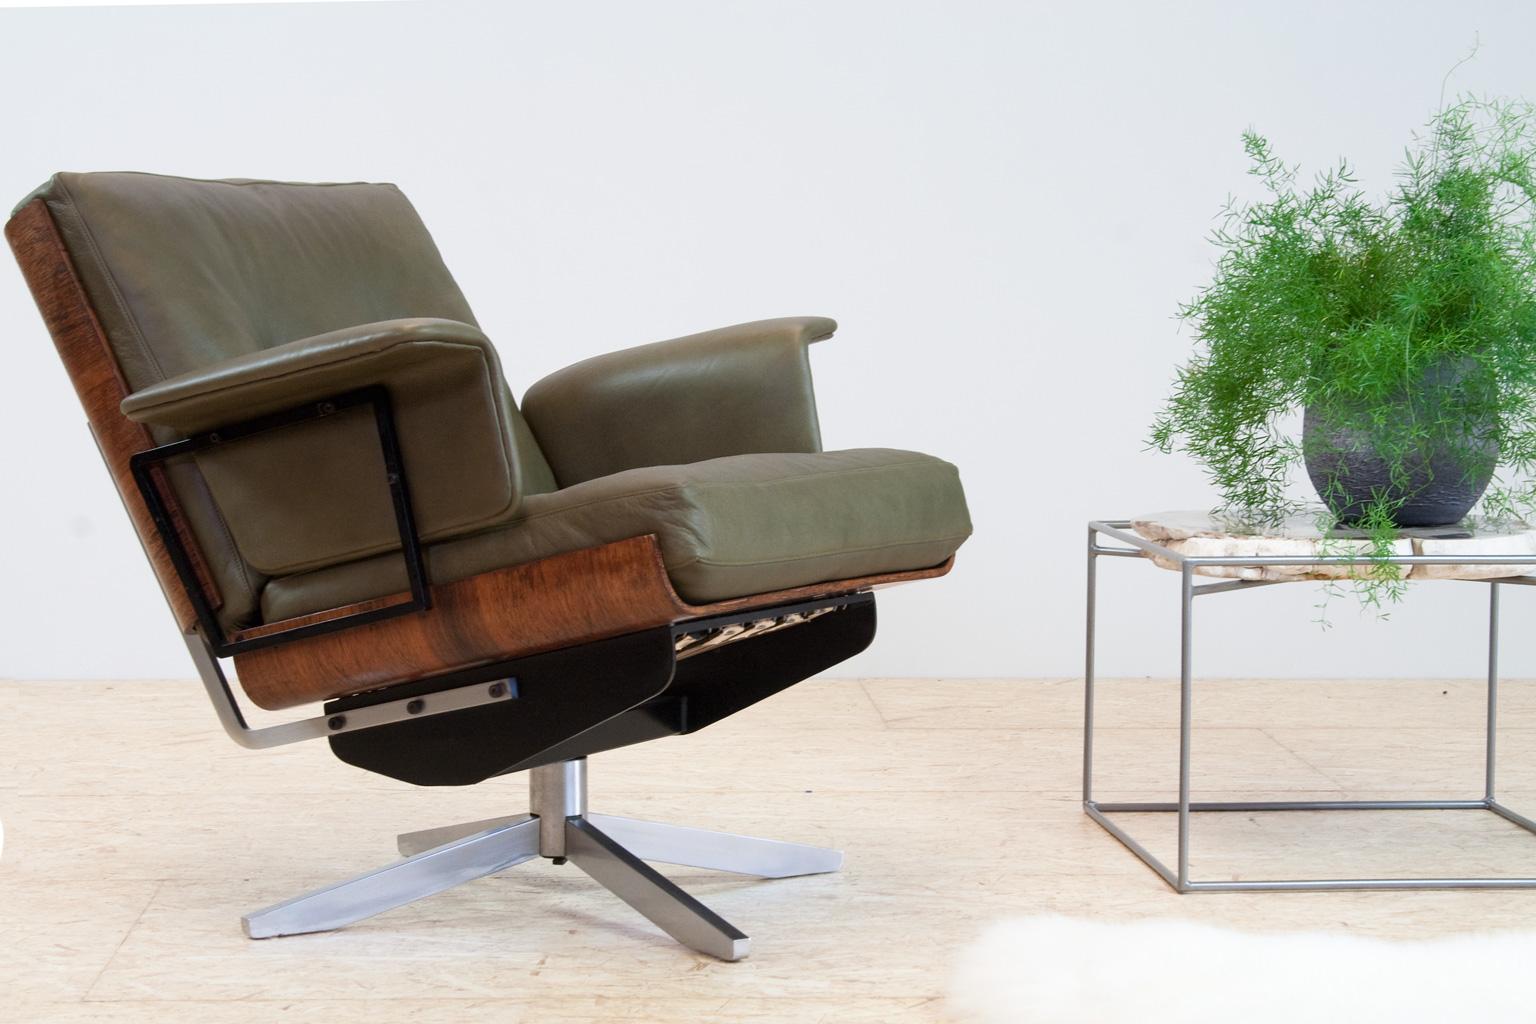 Mid-Century Modern swivel lounge chair, completely restored and re-upholstered, Germany, 1950s. The chair has strong similarities with the iconic lounge chair designs of Ray and Charles Eames or with the Giroflex desk chair by Martin Stoll, yet the